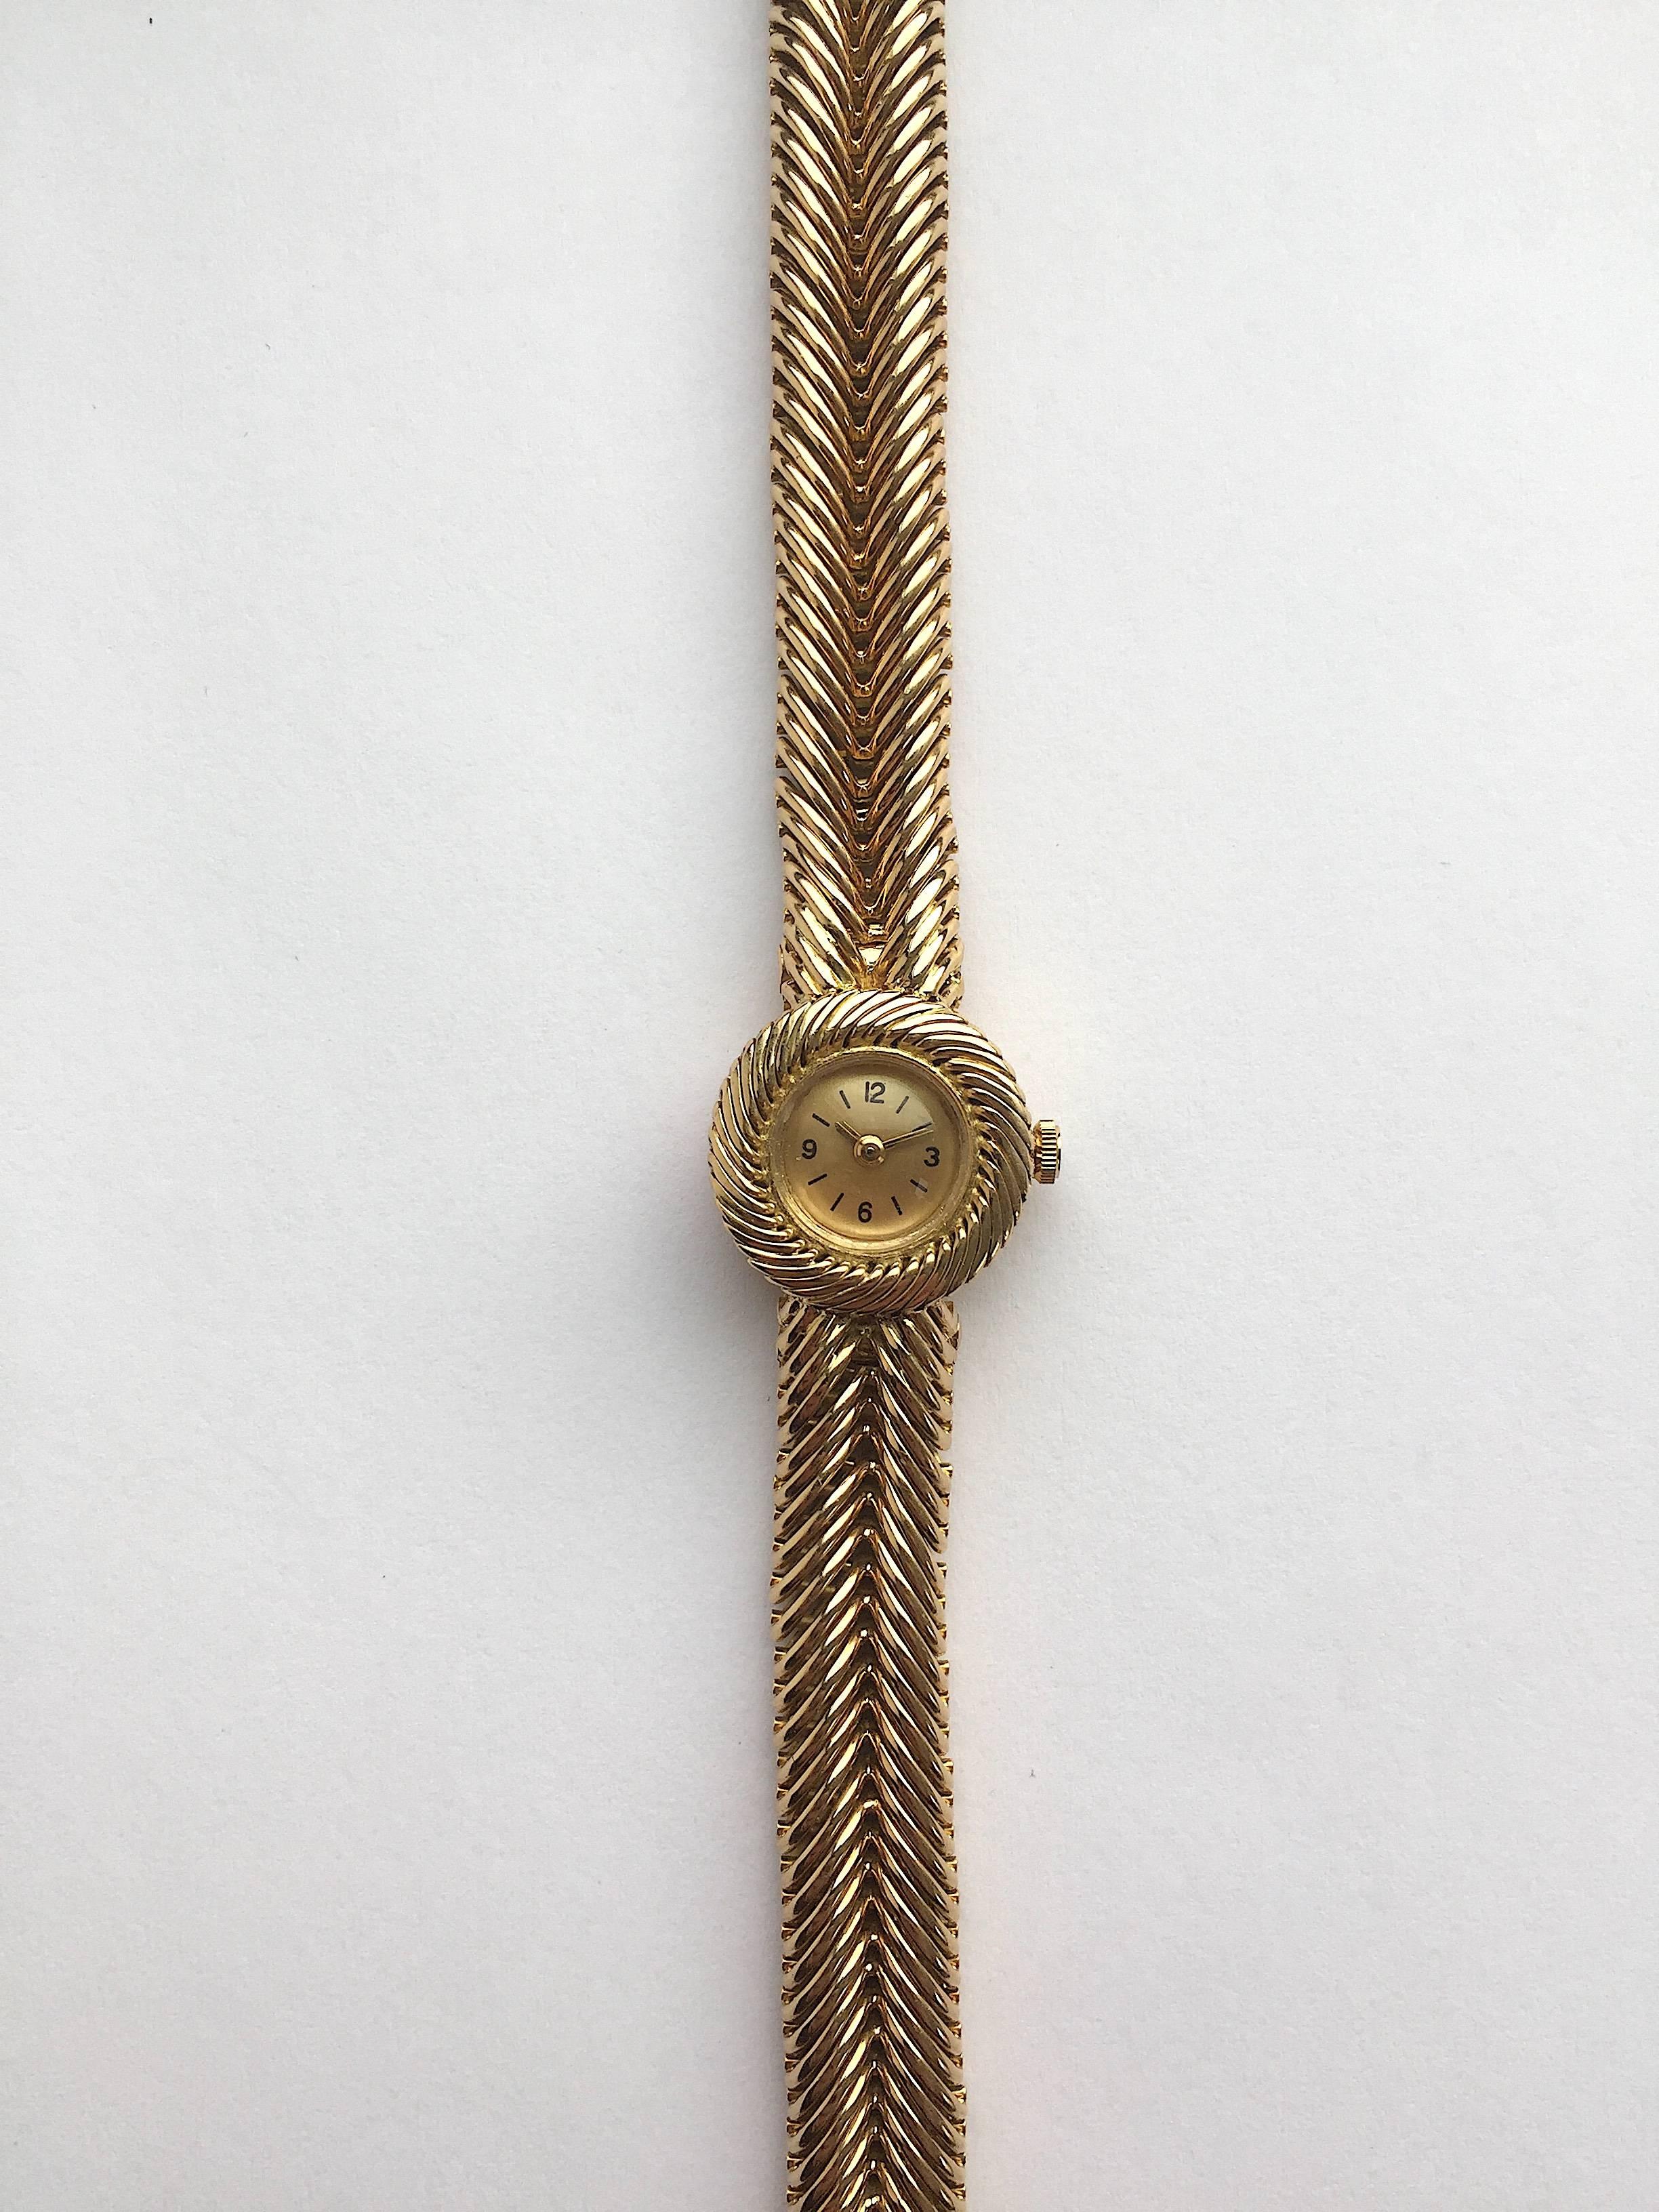 Van Cleef and Arpels 18K Yellow Gold Manual Wind Ladies Dress Watch
Gold Toned Dial with Hours and Second
Manual Wind Movement 
Van Cleef and Arpels Signature Bracelet Design
Ullman Signed Movement
18K Yellow Gold Integrated Bracelet 
Signed Van